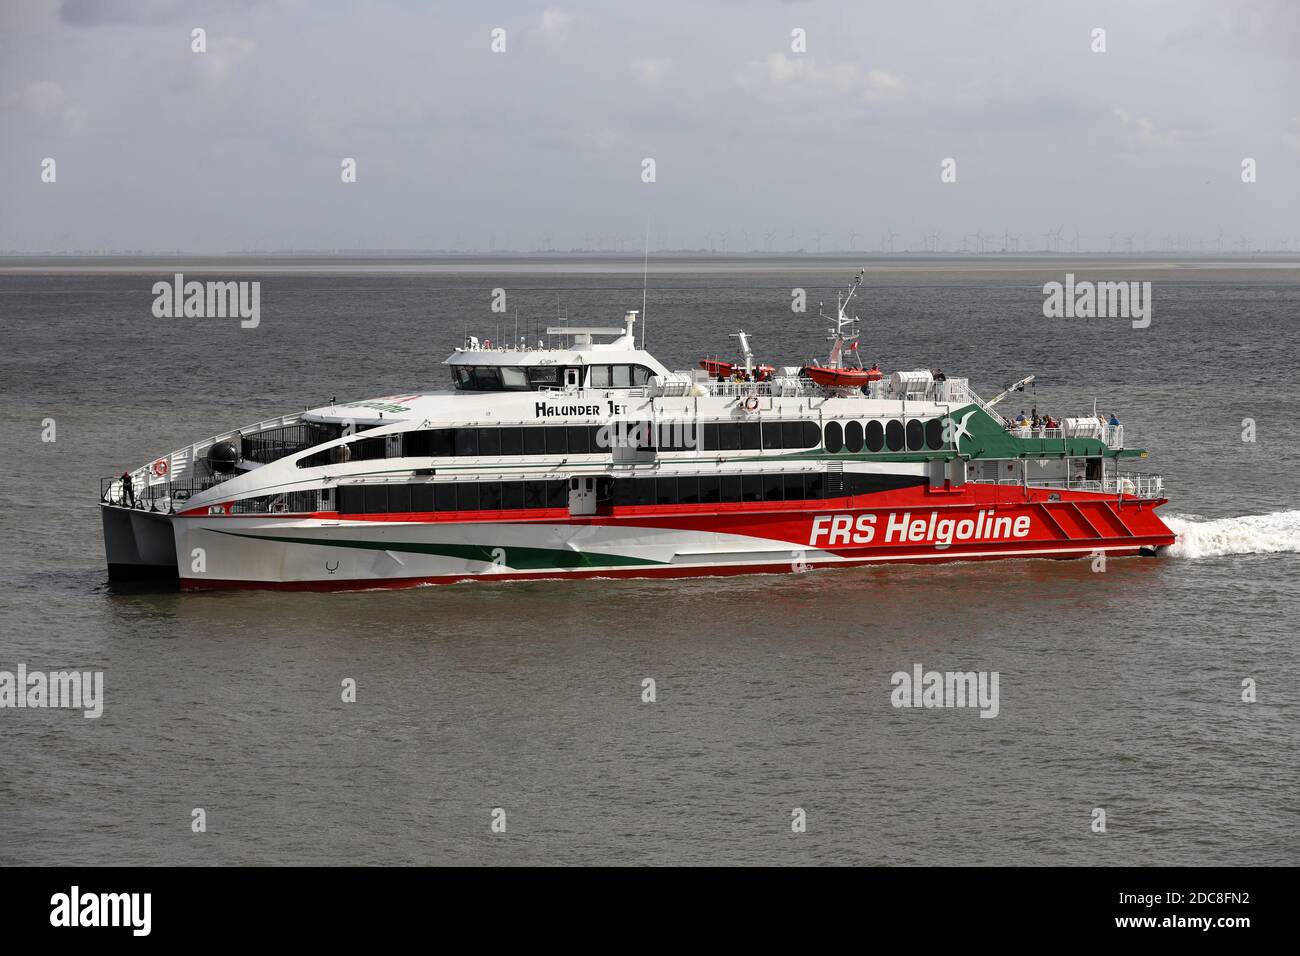 The high-speed passenger ship Halunder Jet will reach the port of Cuxhaven on August 22, 2020. Stock Photo